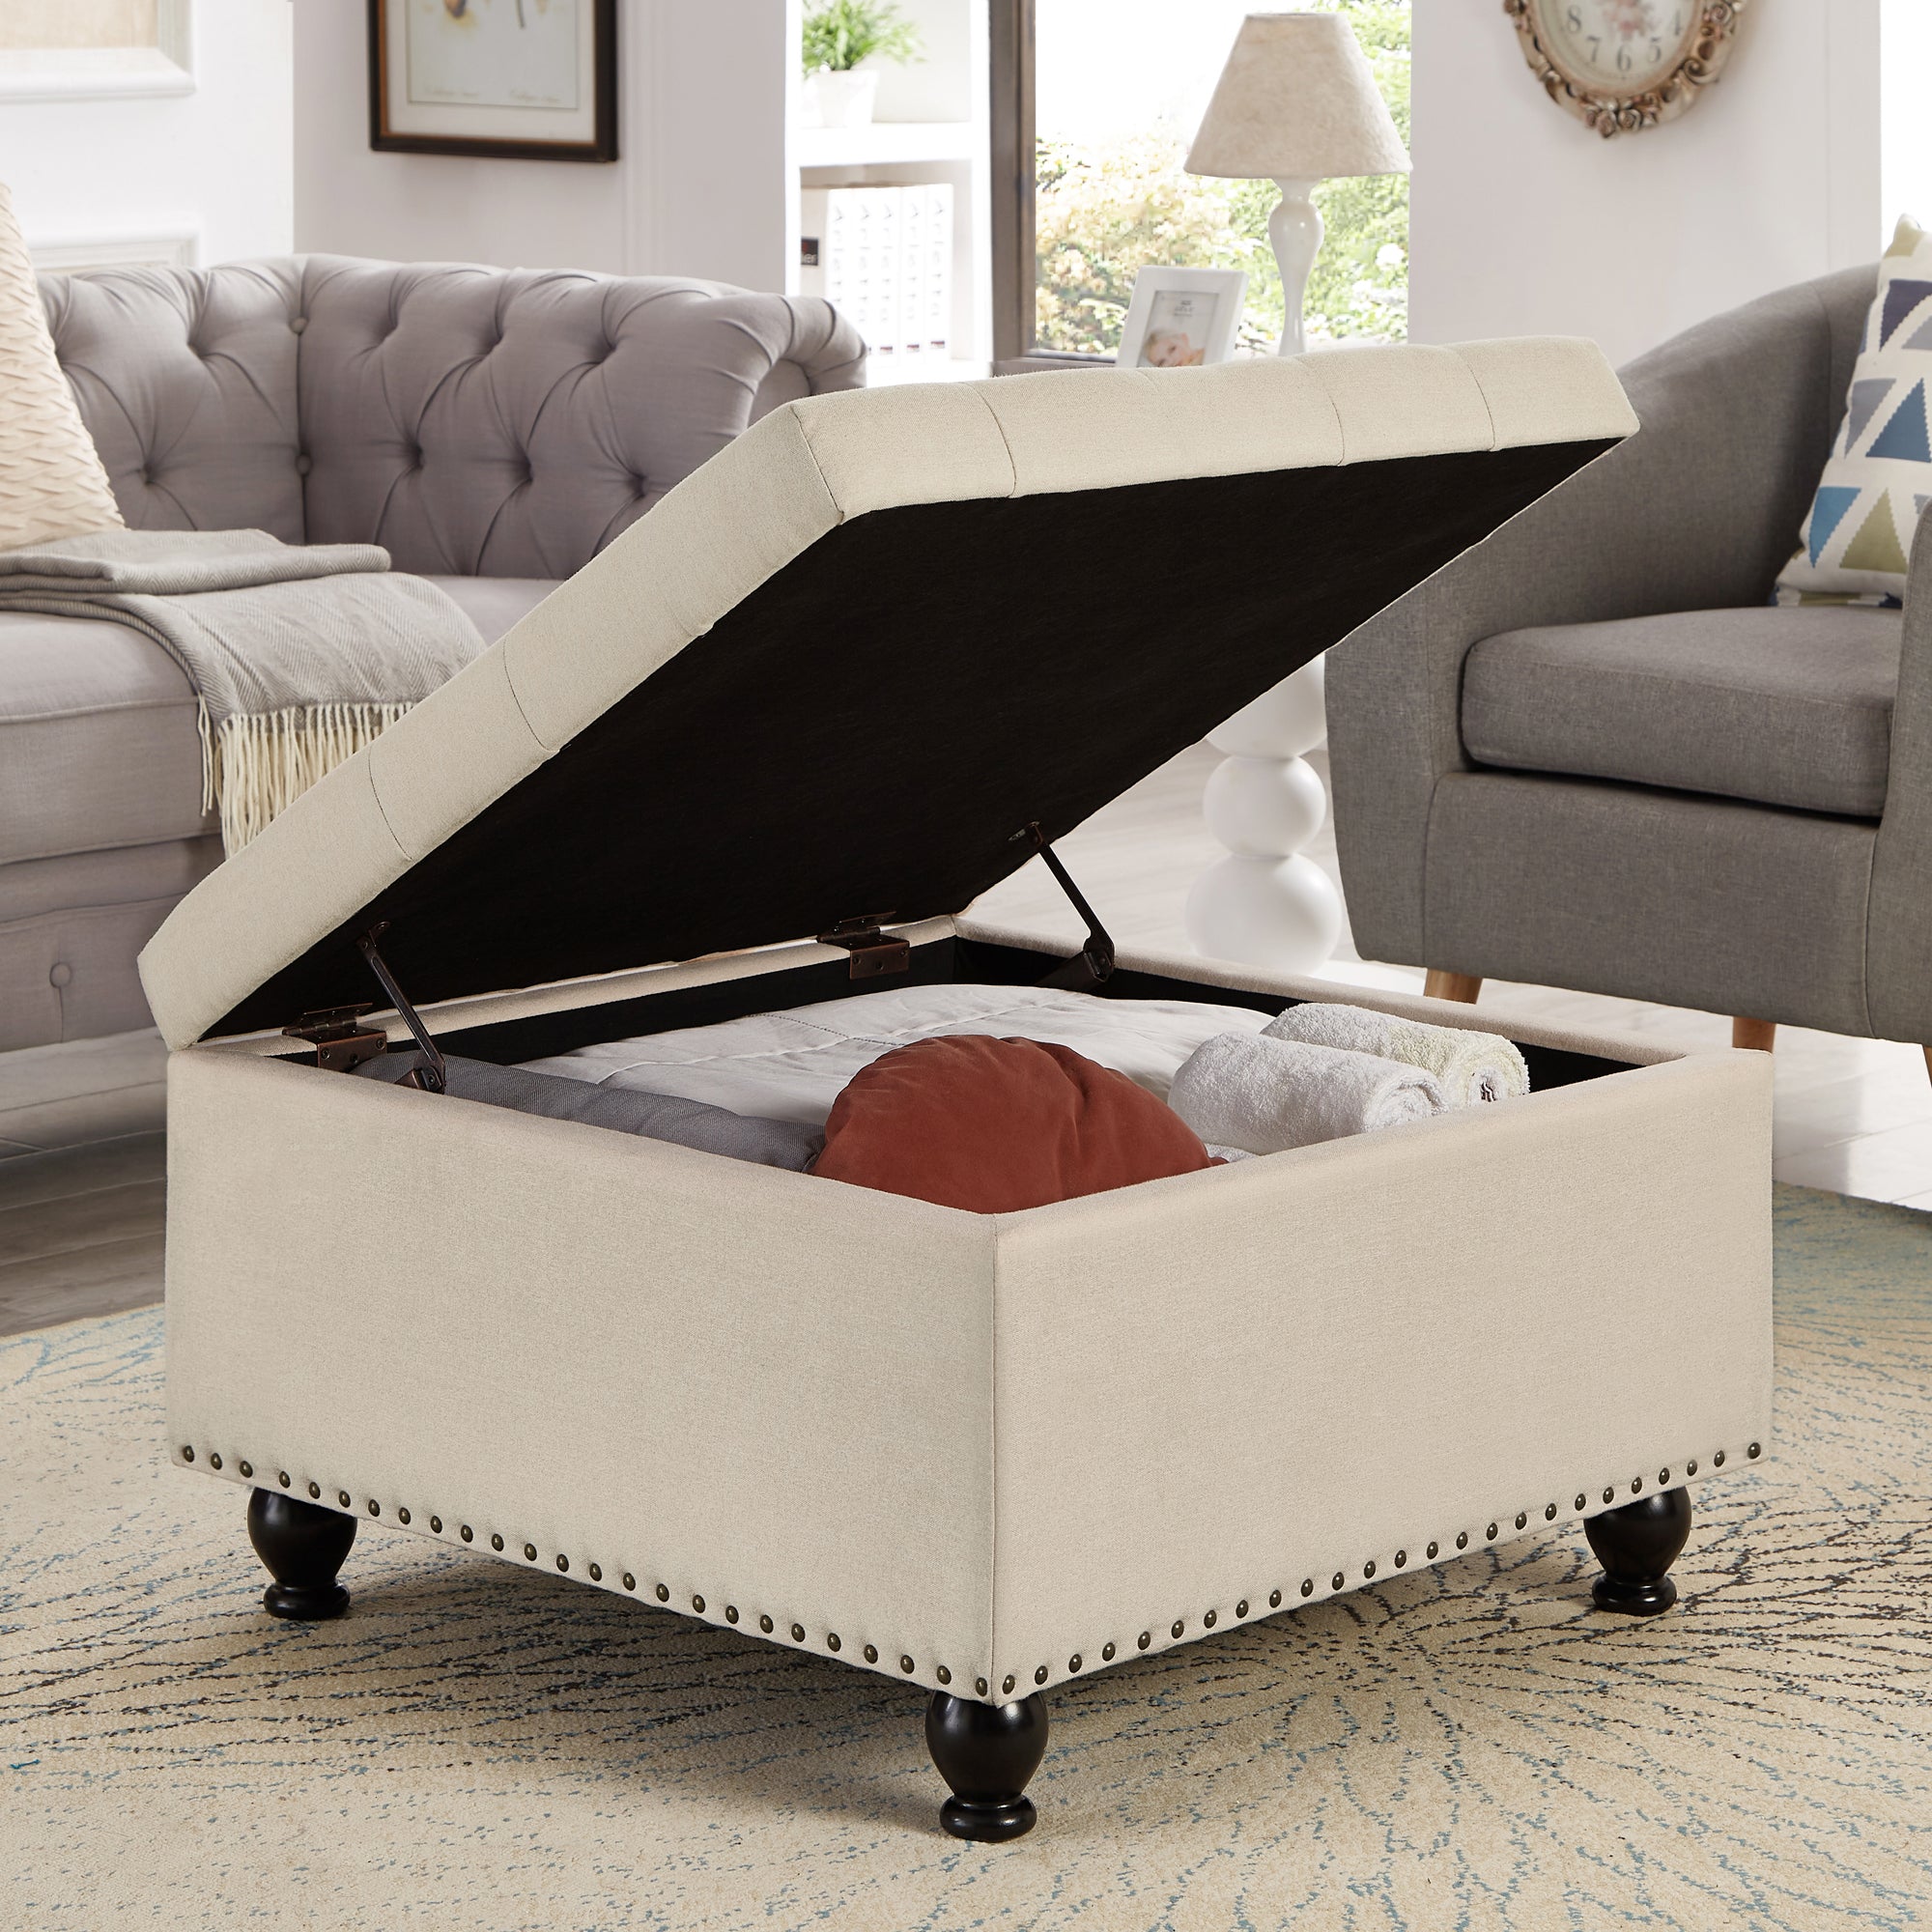 30" x 30" Large Square Storage Ottoman with Wooden Legs